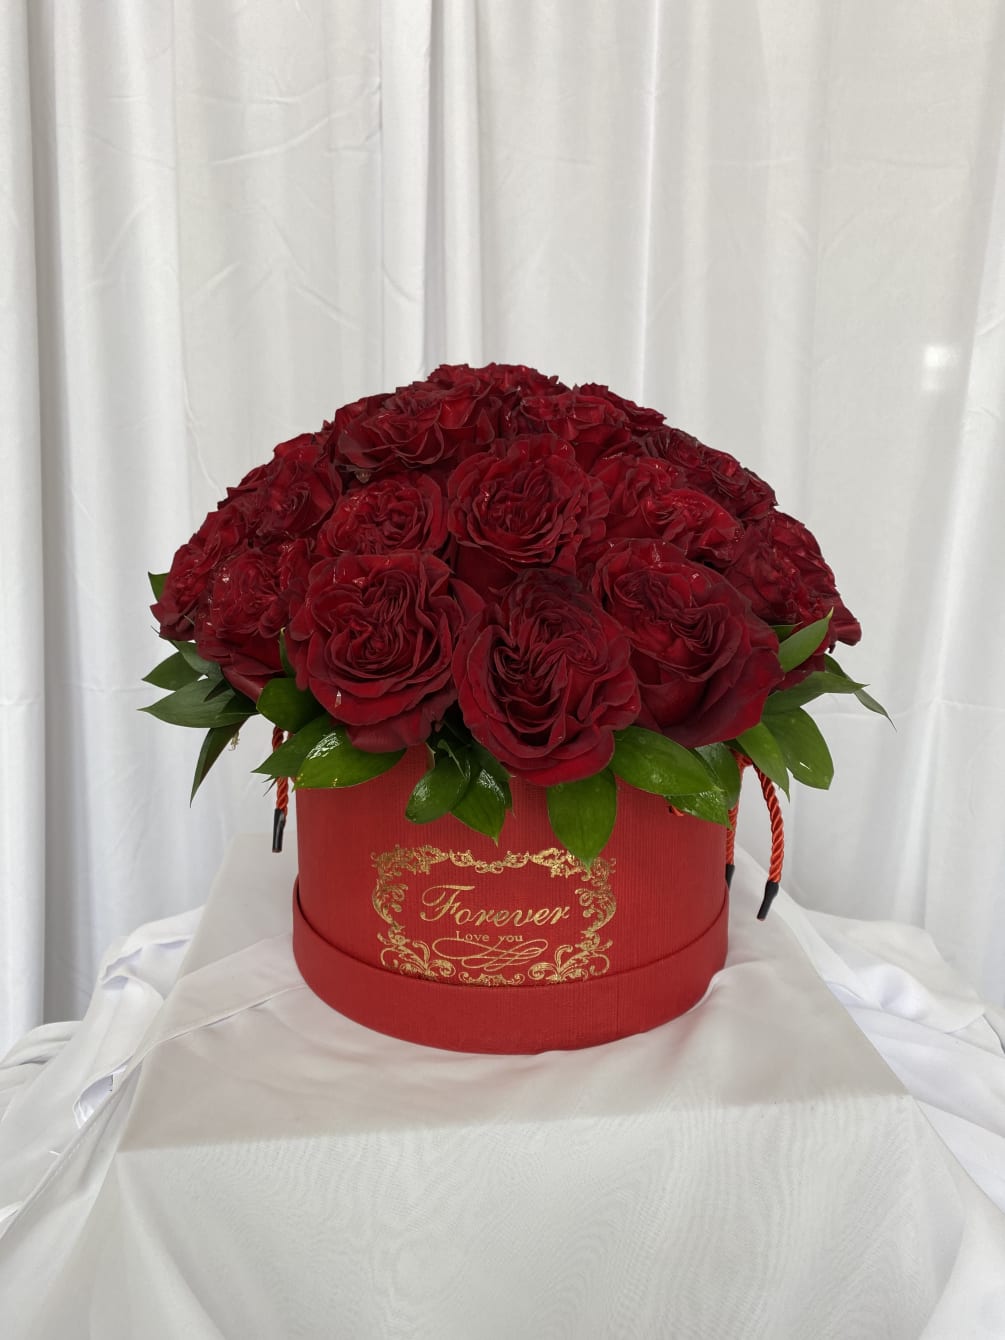 Traditional red roses arranged in a floral box. 

NOTE: photo shown is